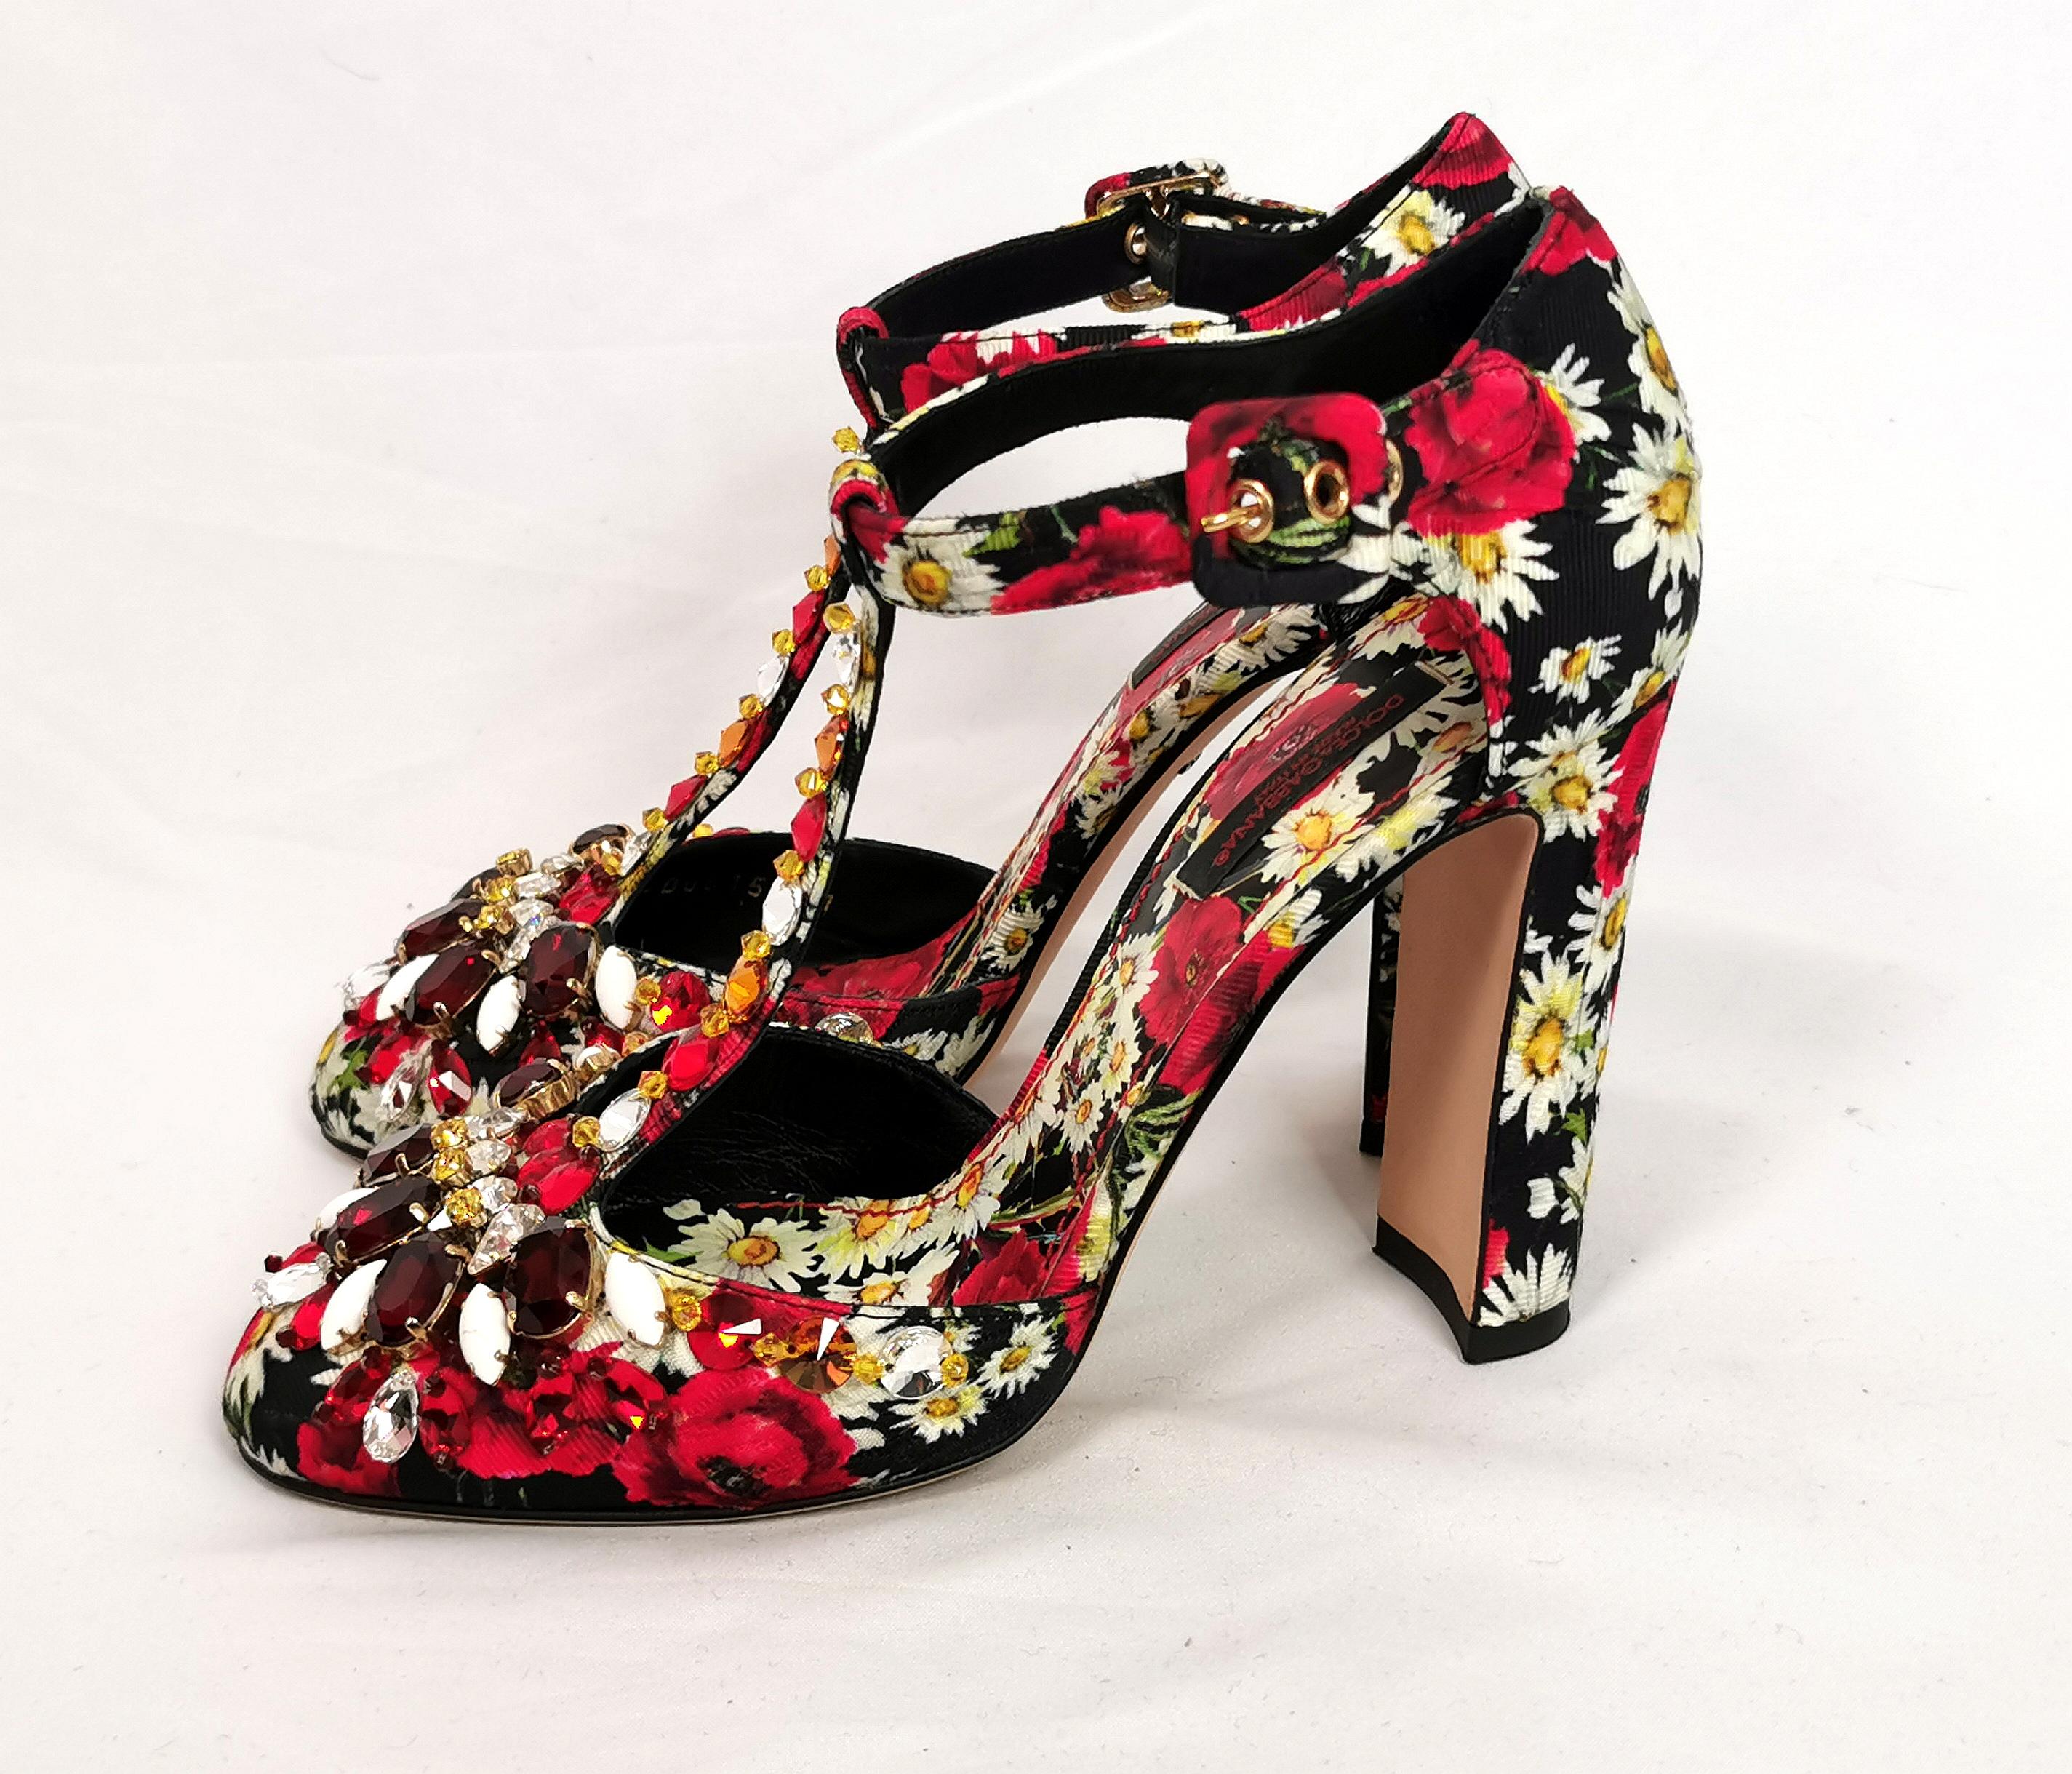 A truly gorgeous pair of Dolce and Gabbana floral jewelled heeled sandals.

They have a T bar shape with chunky high heels in the most fantastic all over printed canvas with a floral design of poppies and daisies on a black ground.

They fasten with